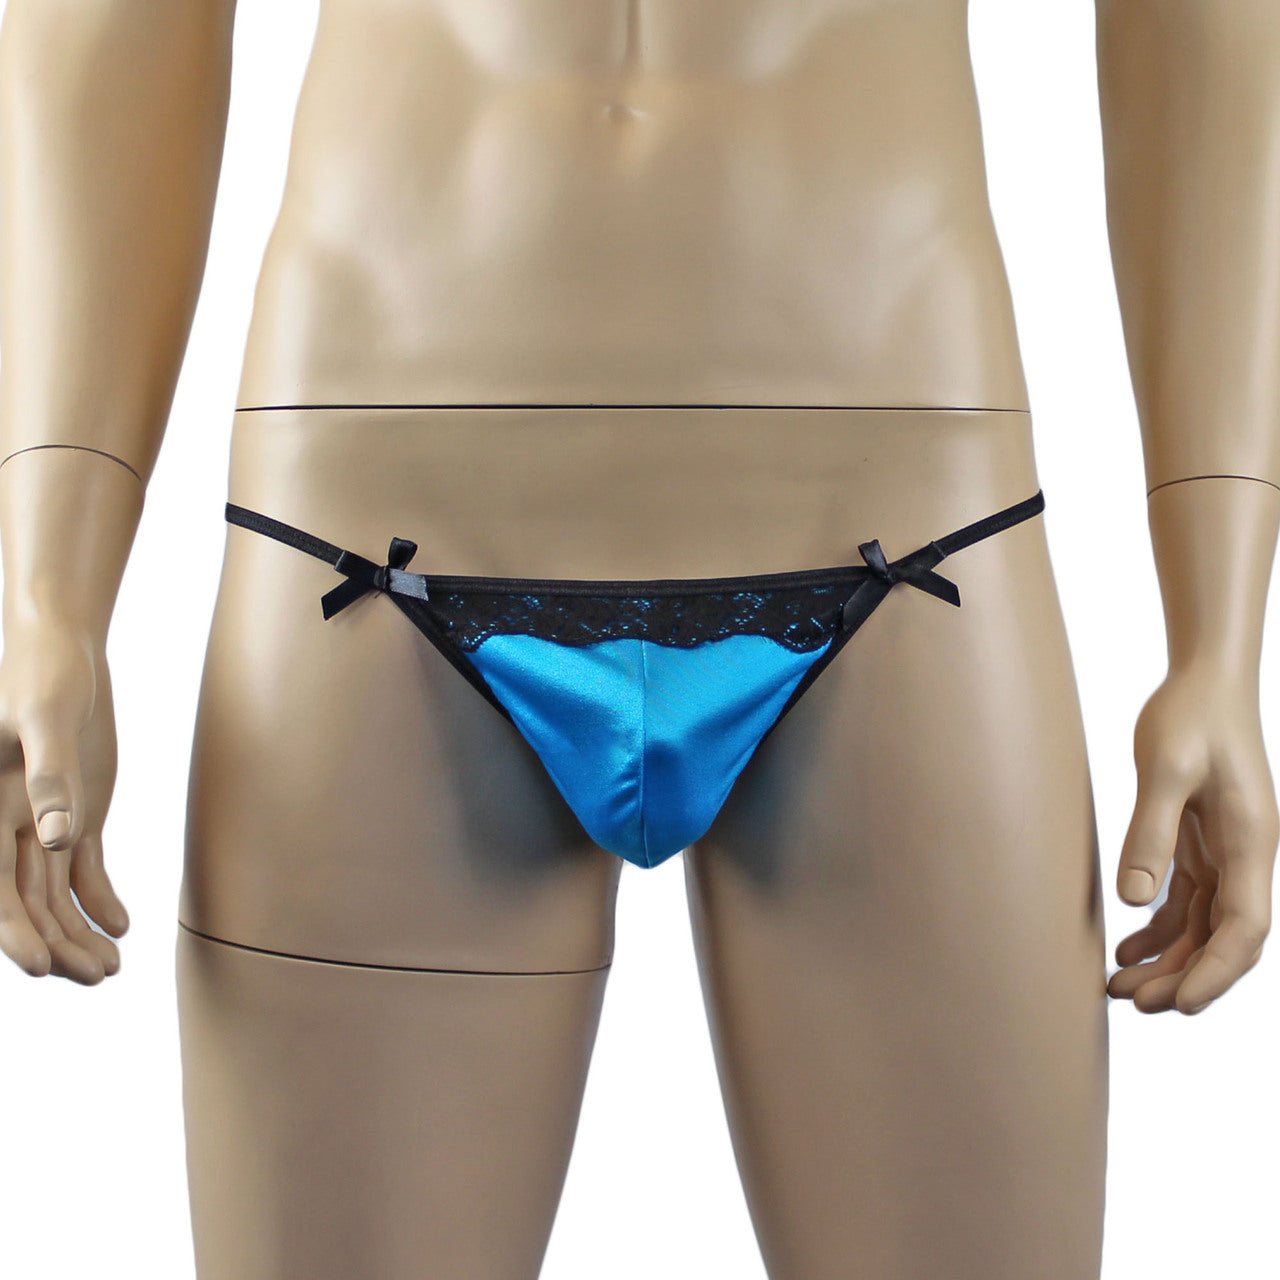 Mens Feminine Satin, Lace and Bow Pouch G string Turquoise and Black